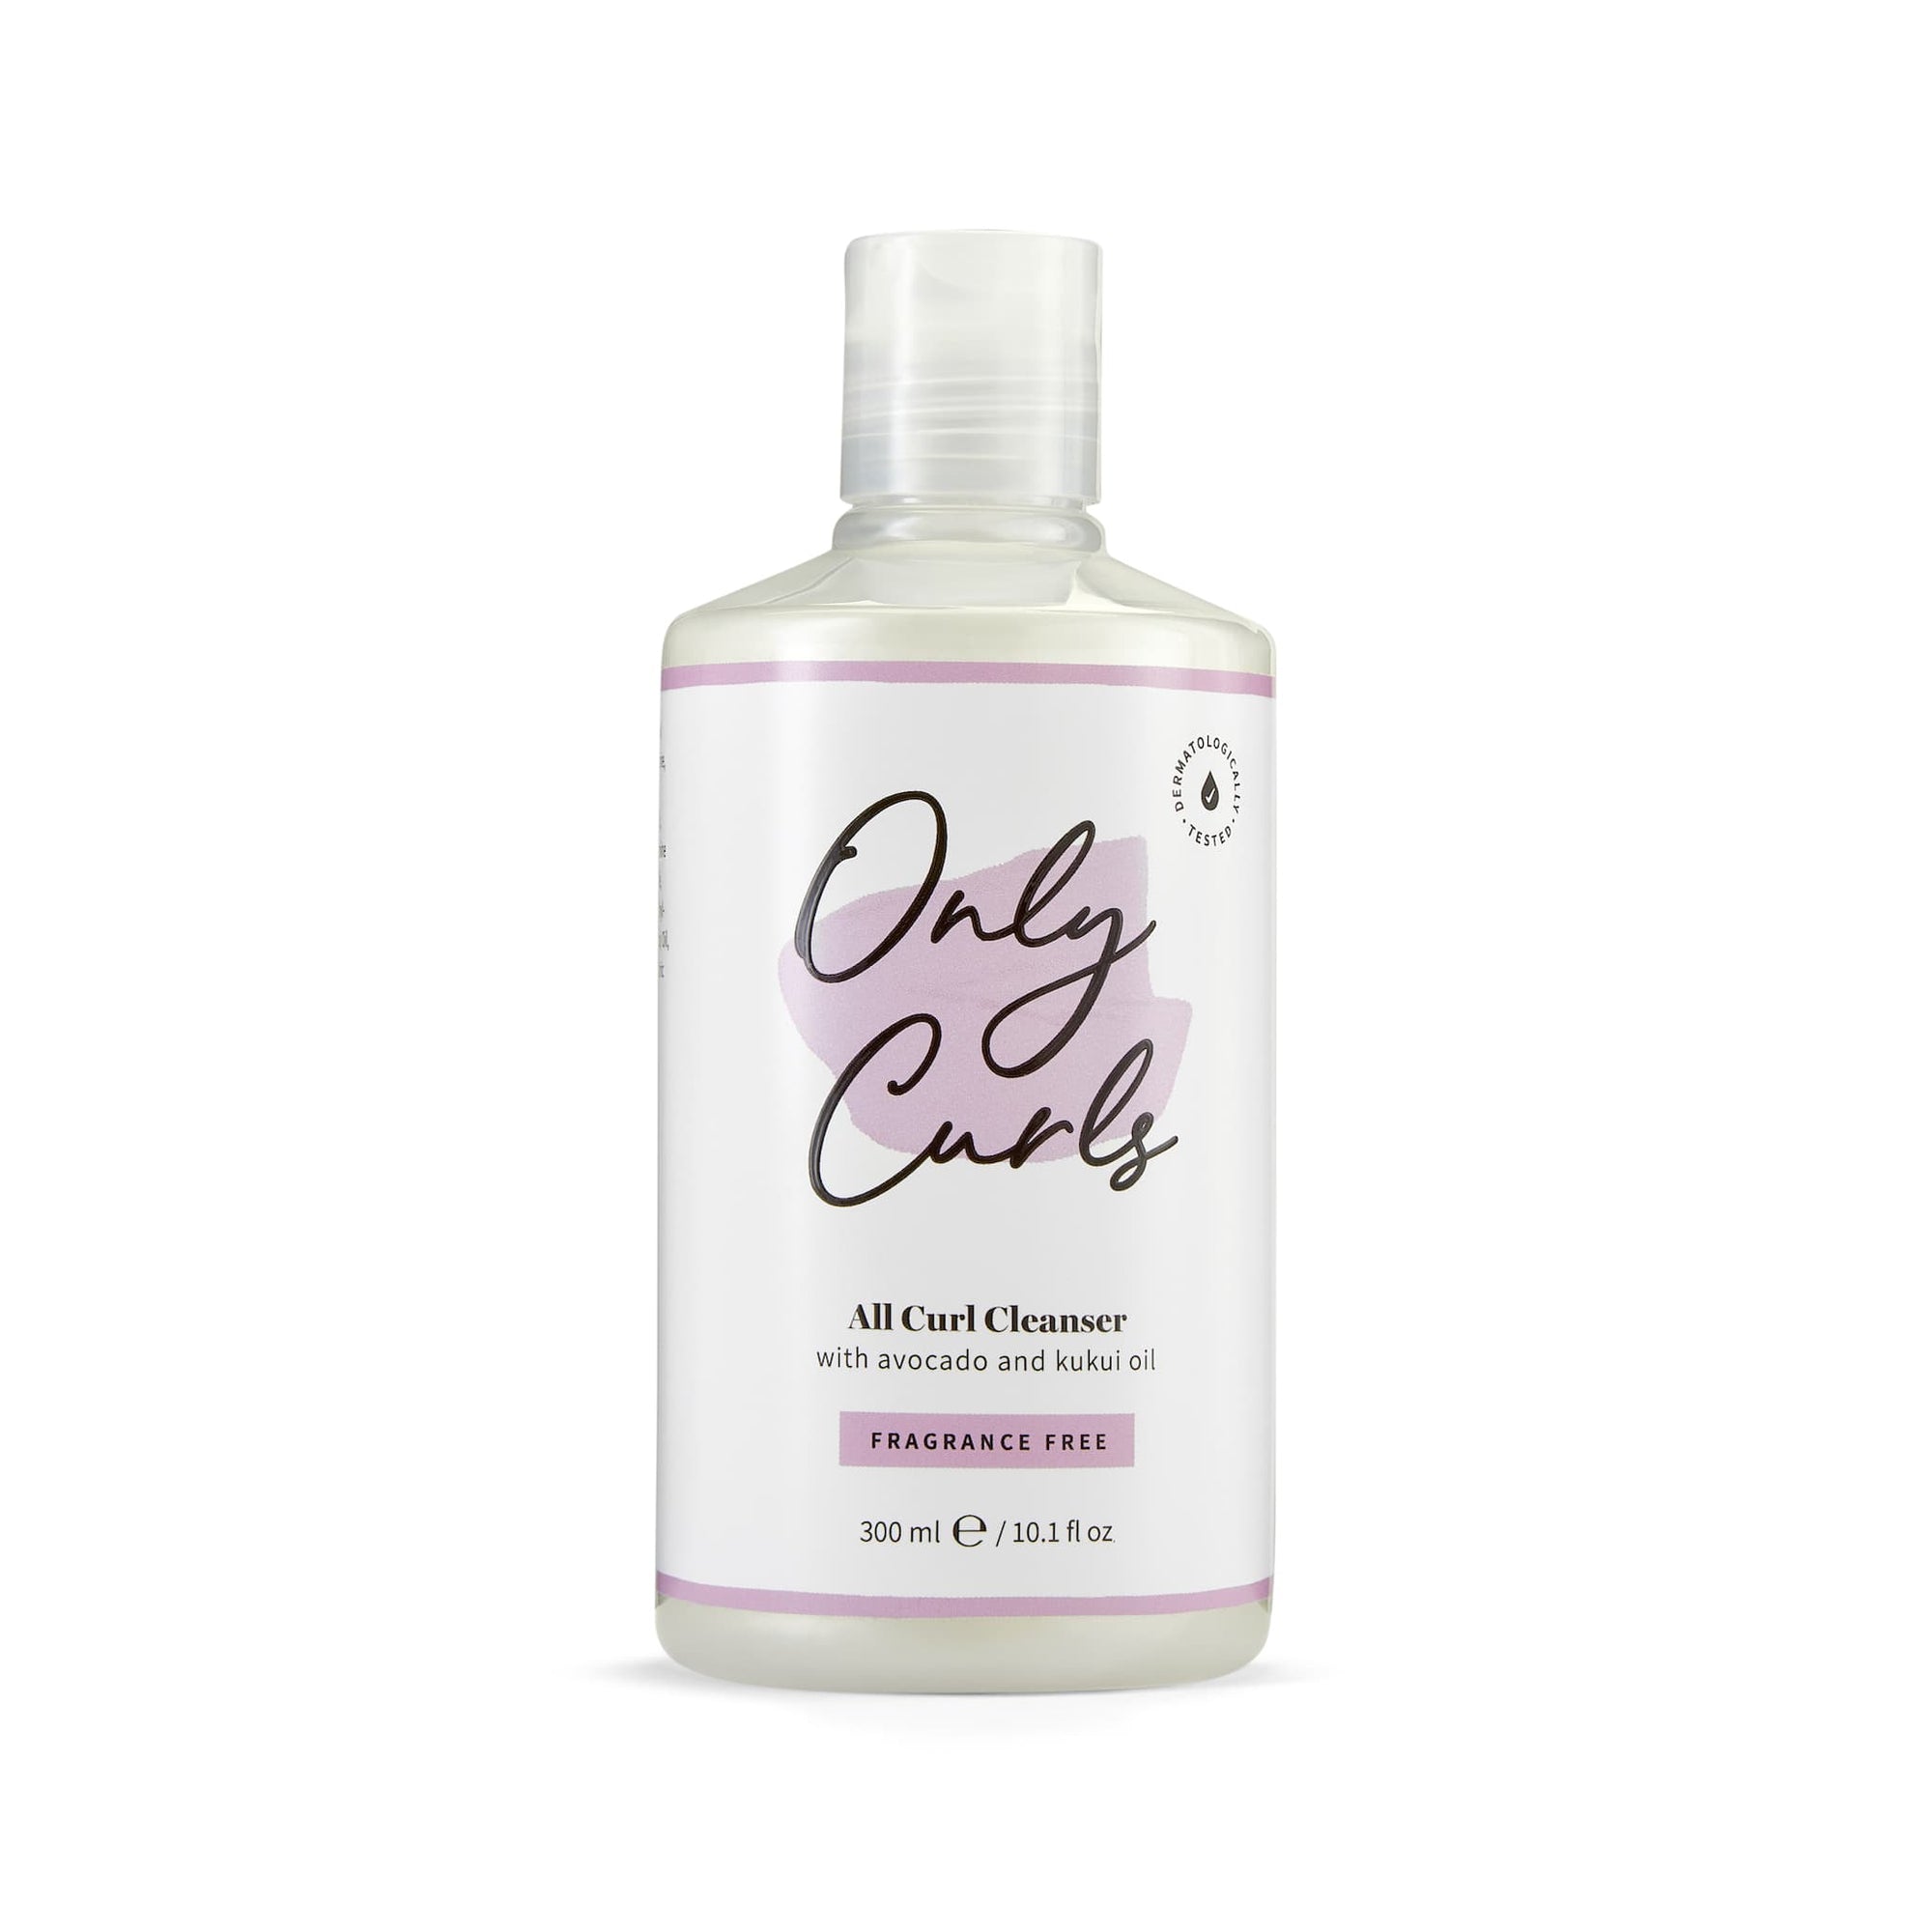 All Curl Cleanser - Fragrance Free - Only Curls